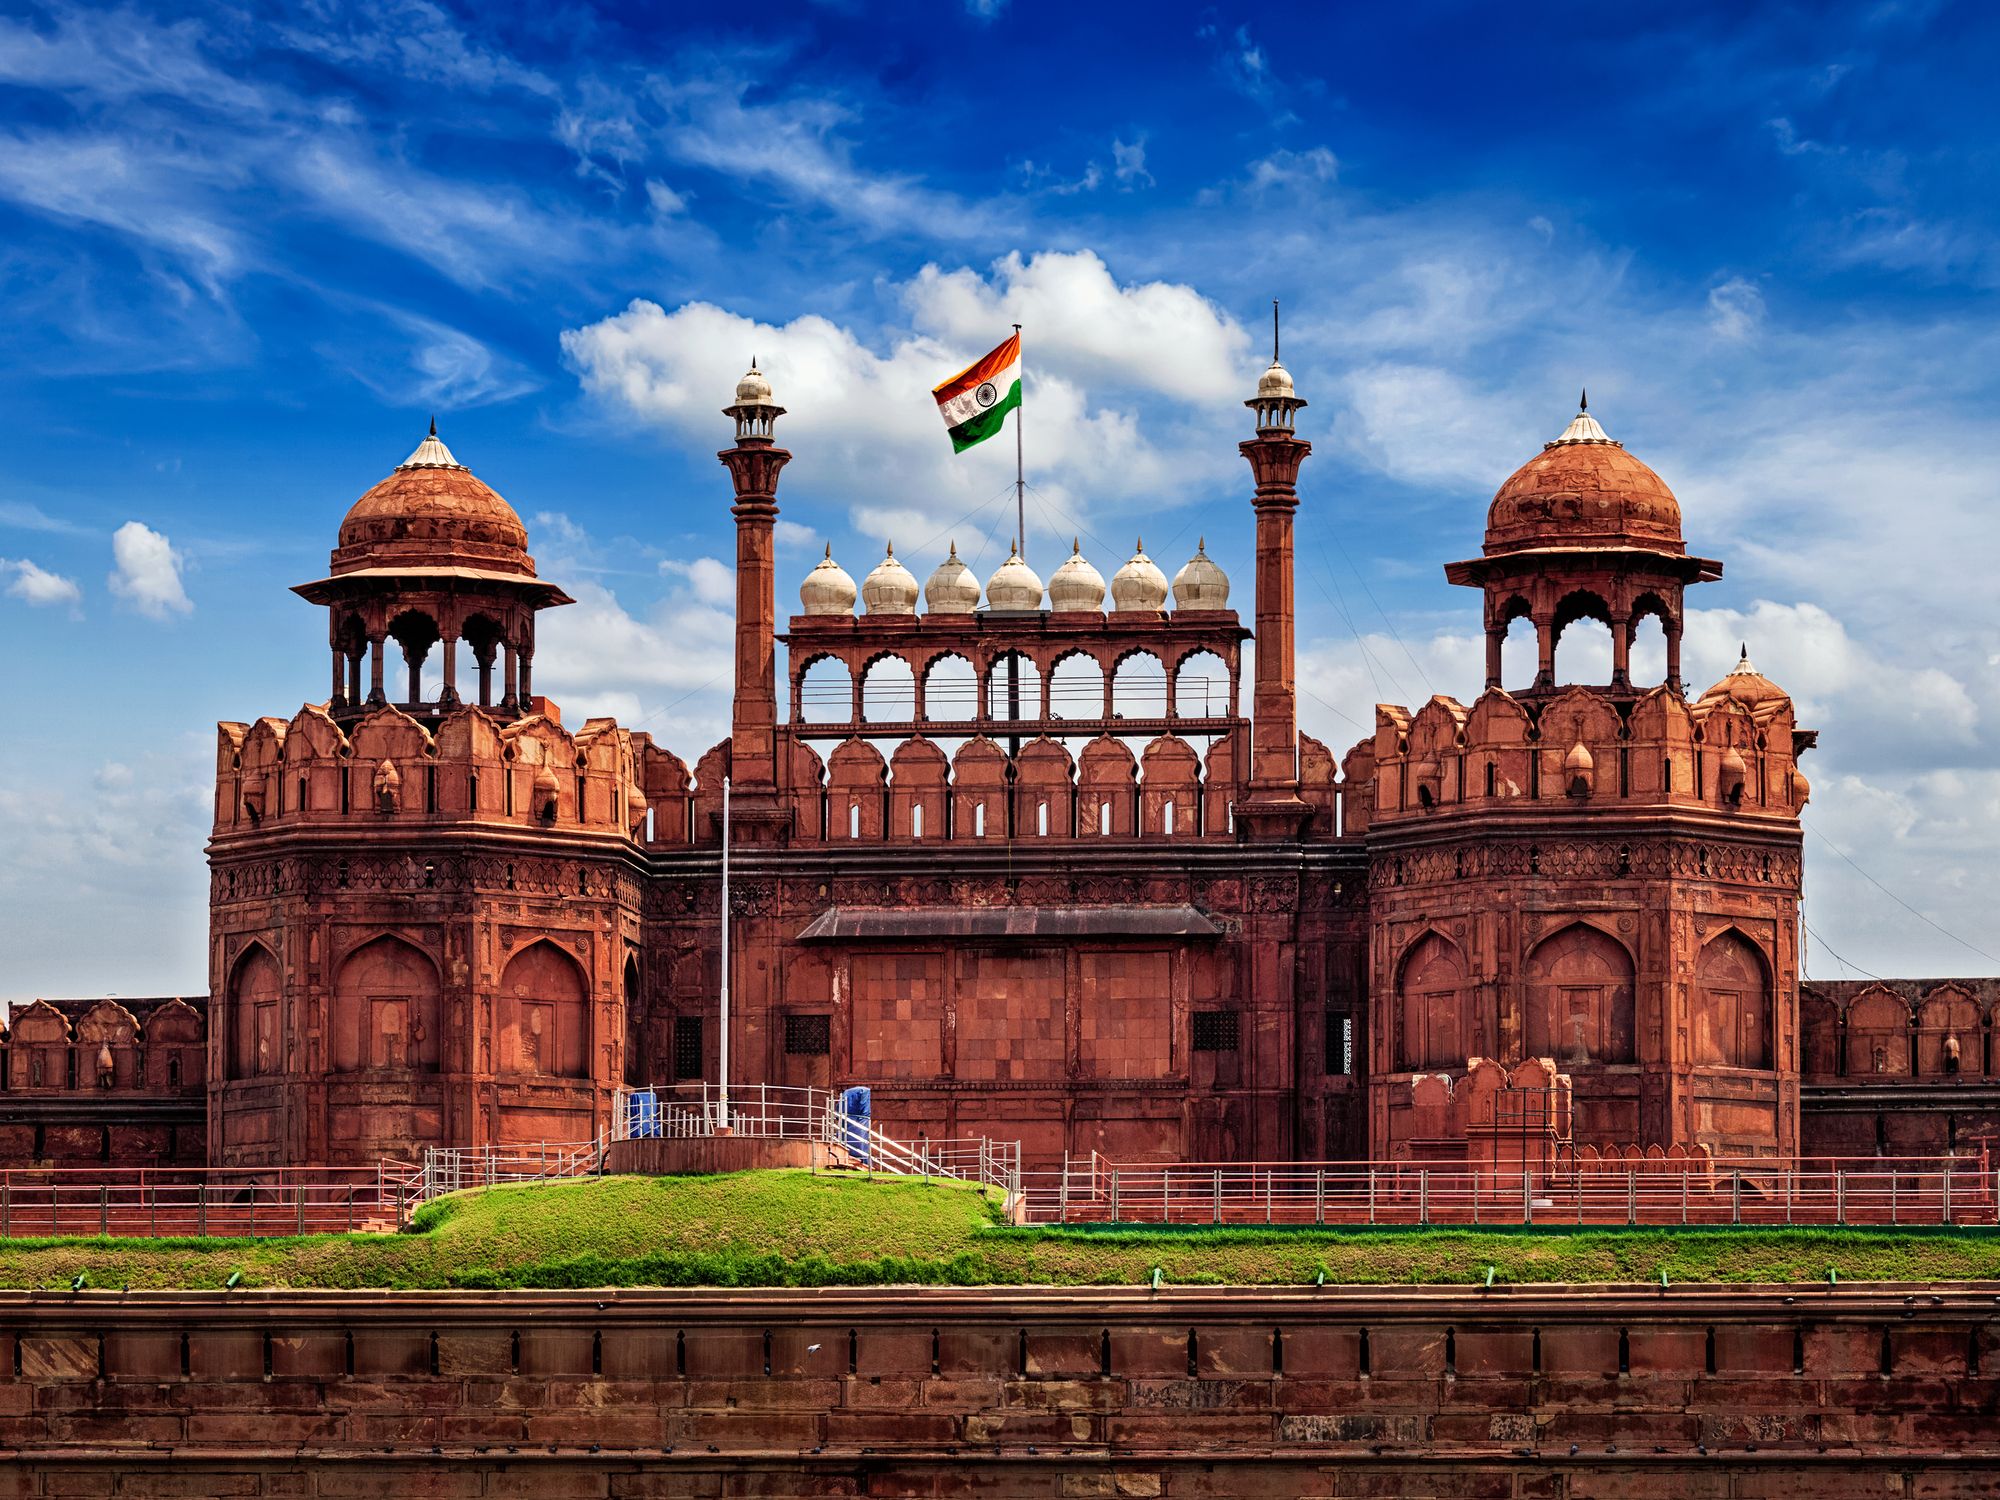 The Red Fort, Old Delhi, India